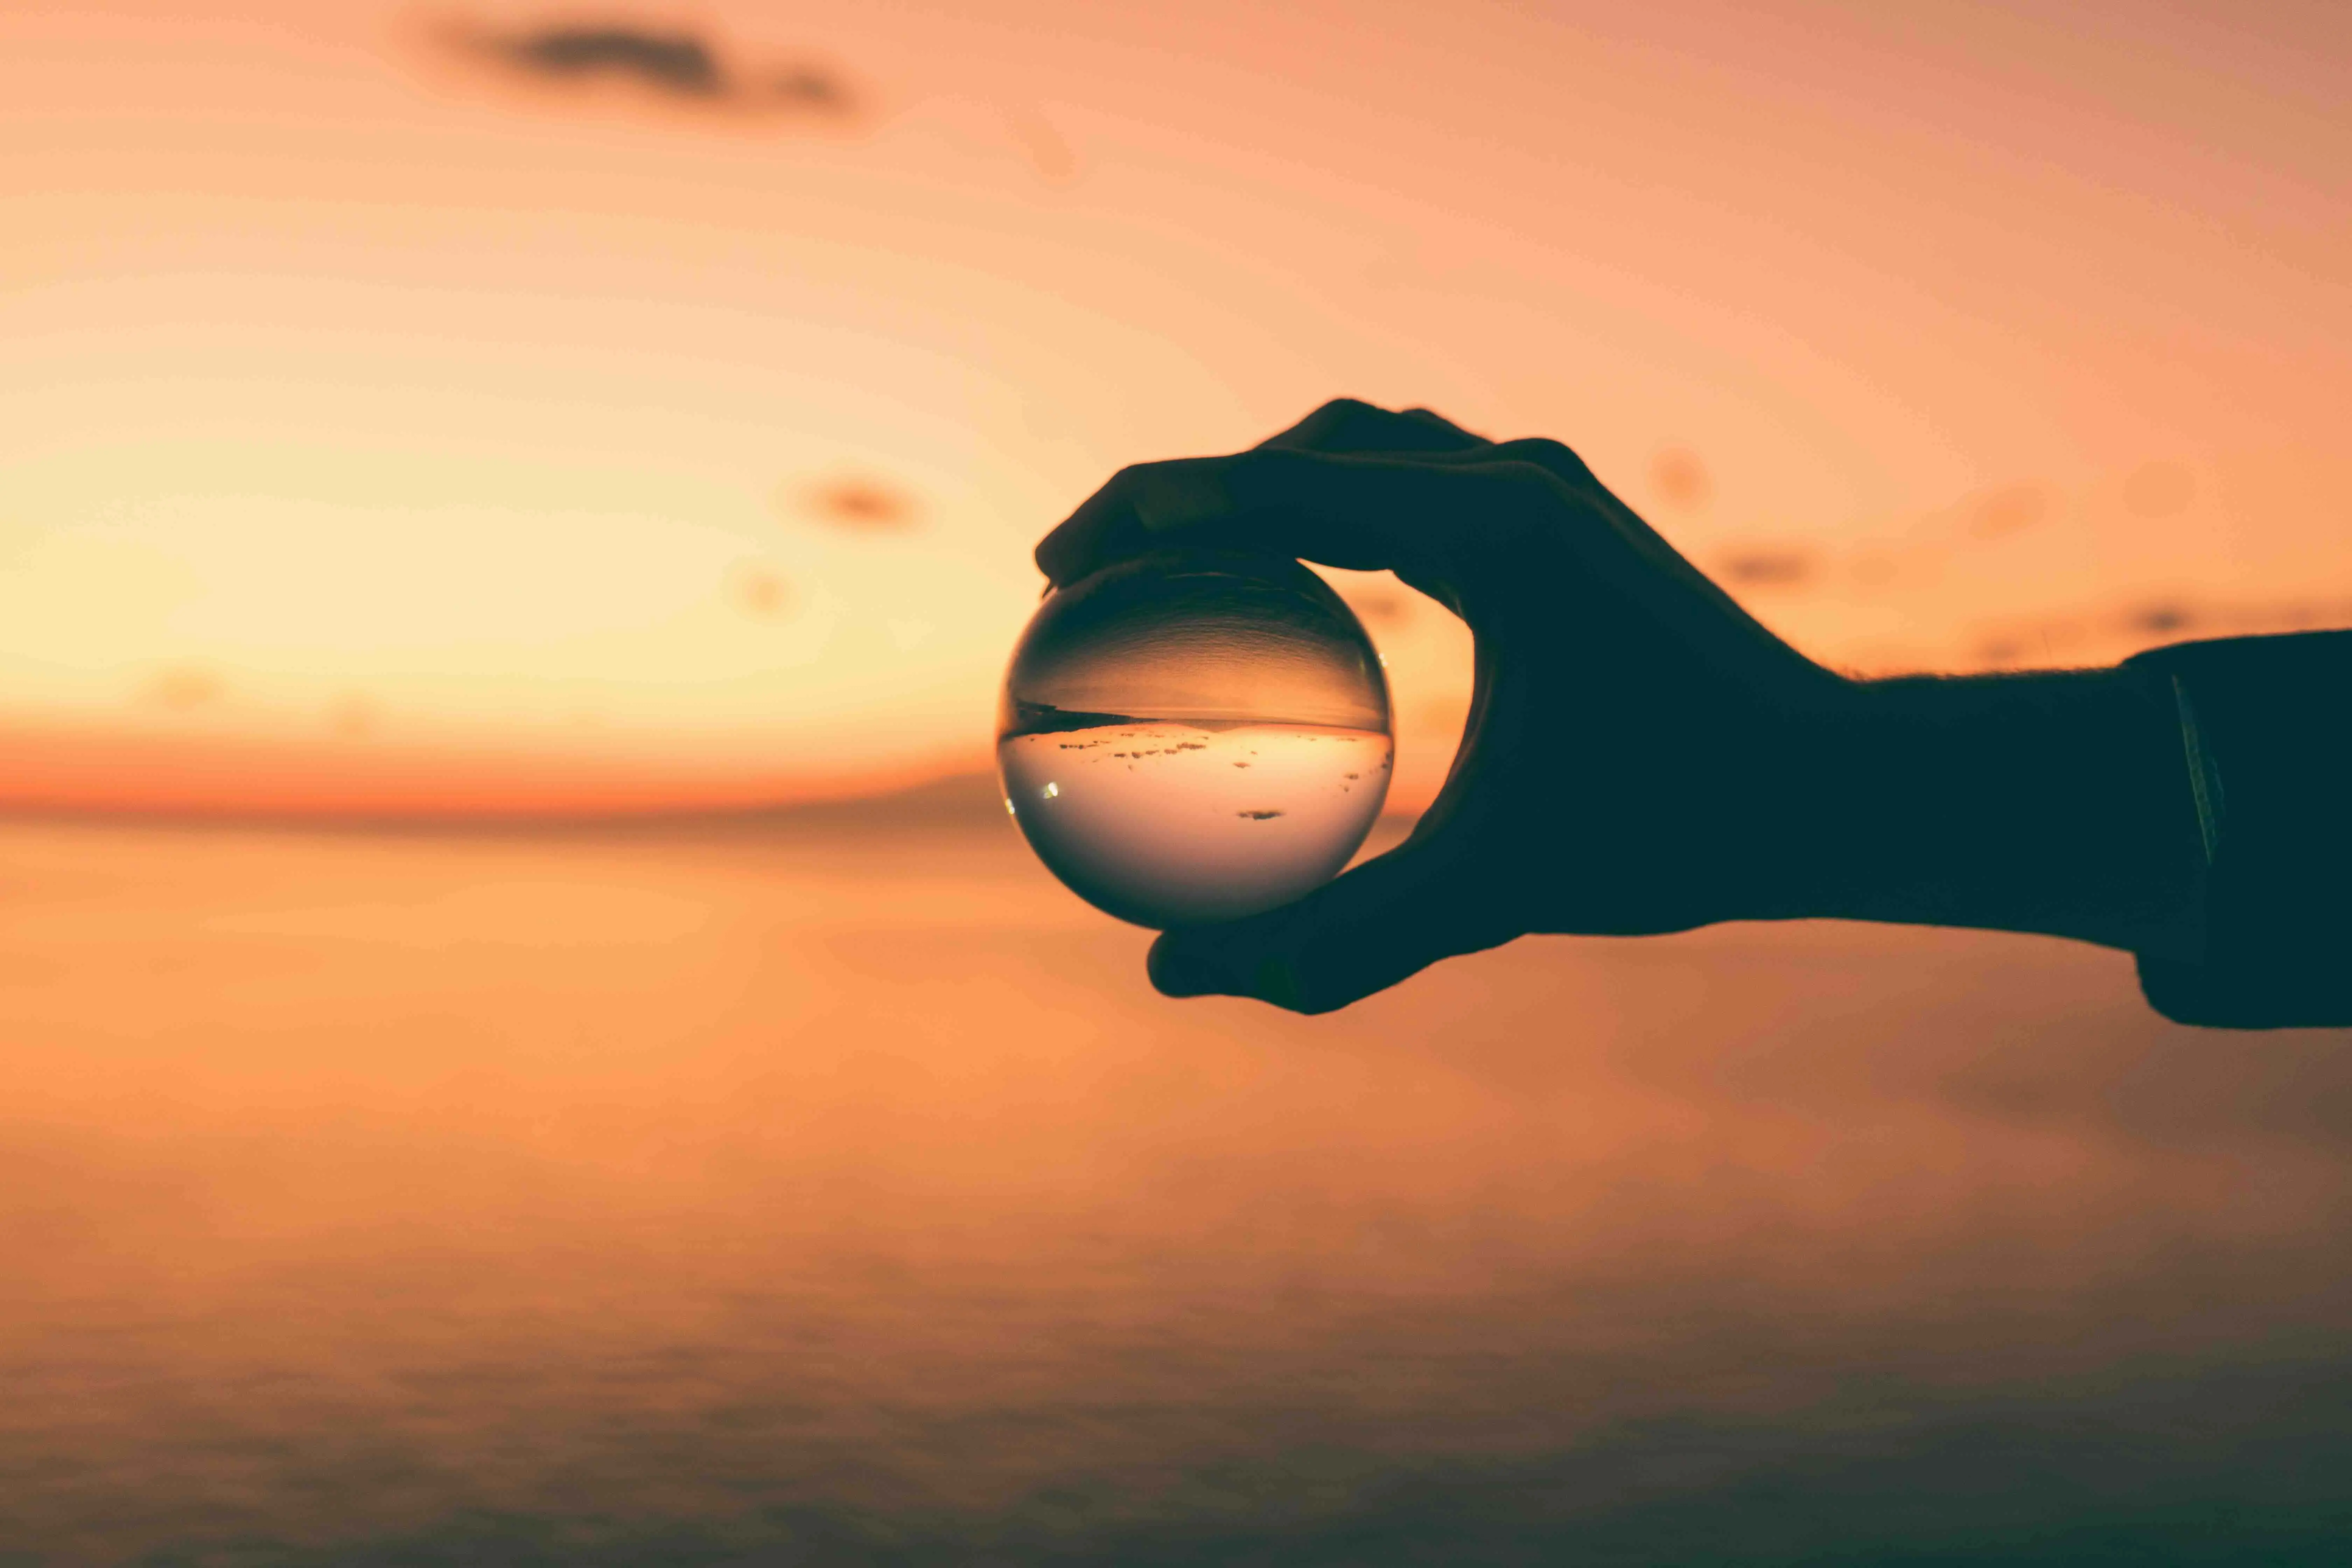 A hand holding a glass ball, magnifying a portion of the horizon in the distance